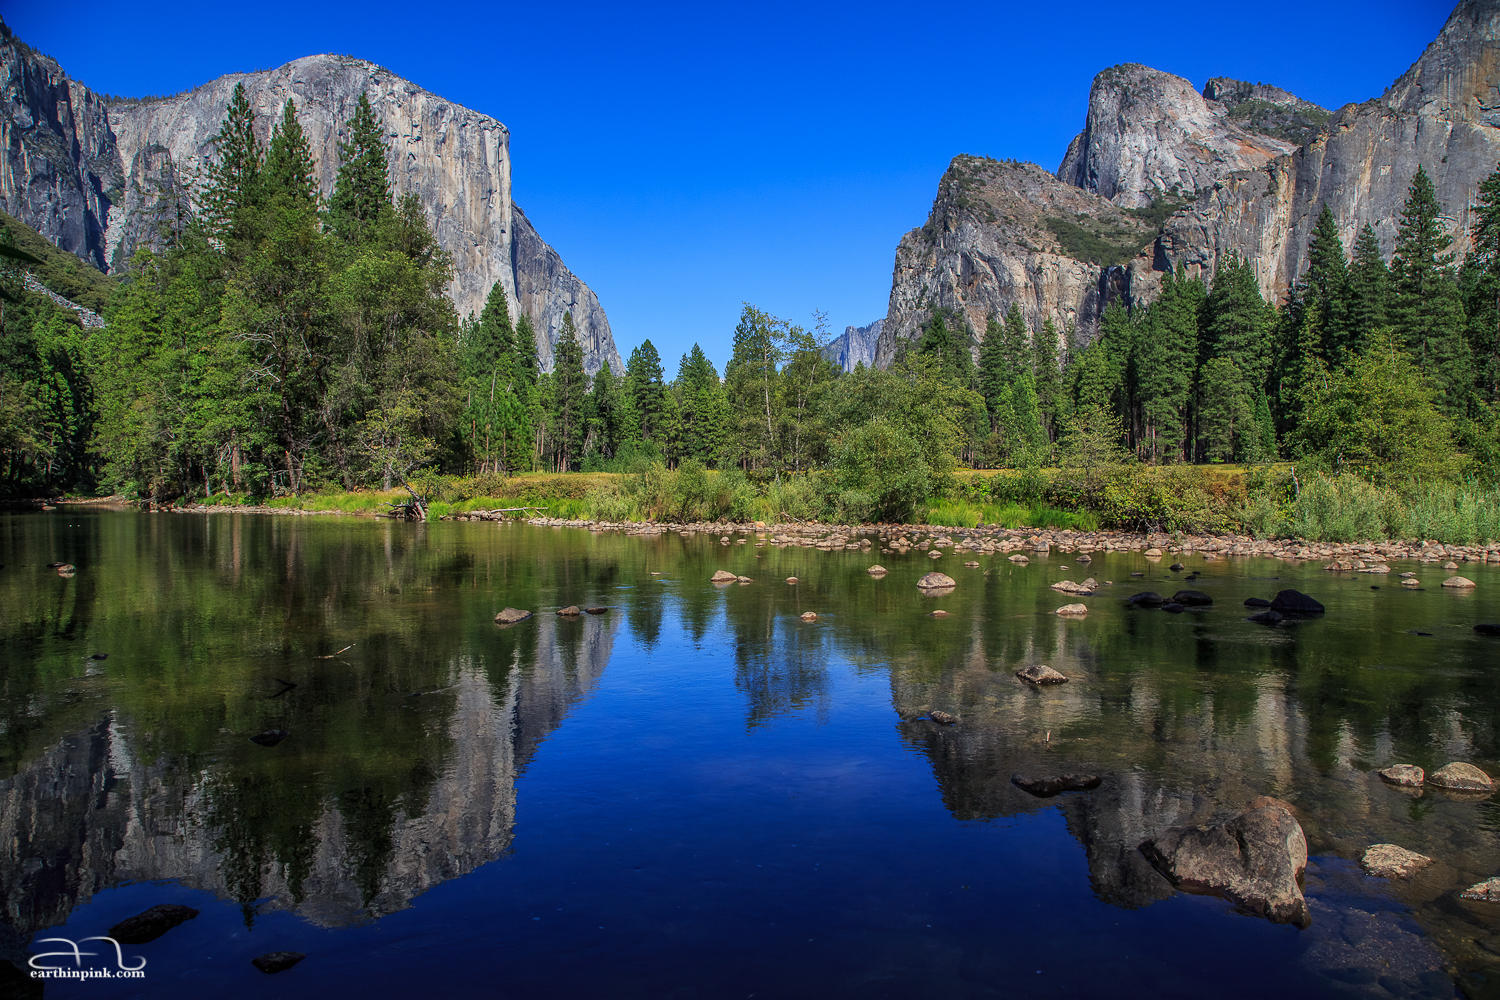 El Capitan reflecting in the waters of the Merced River at Yosemite's Valley View, California.